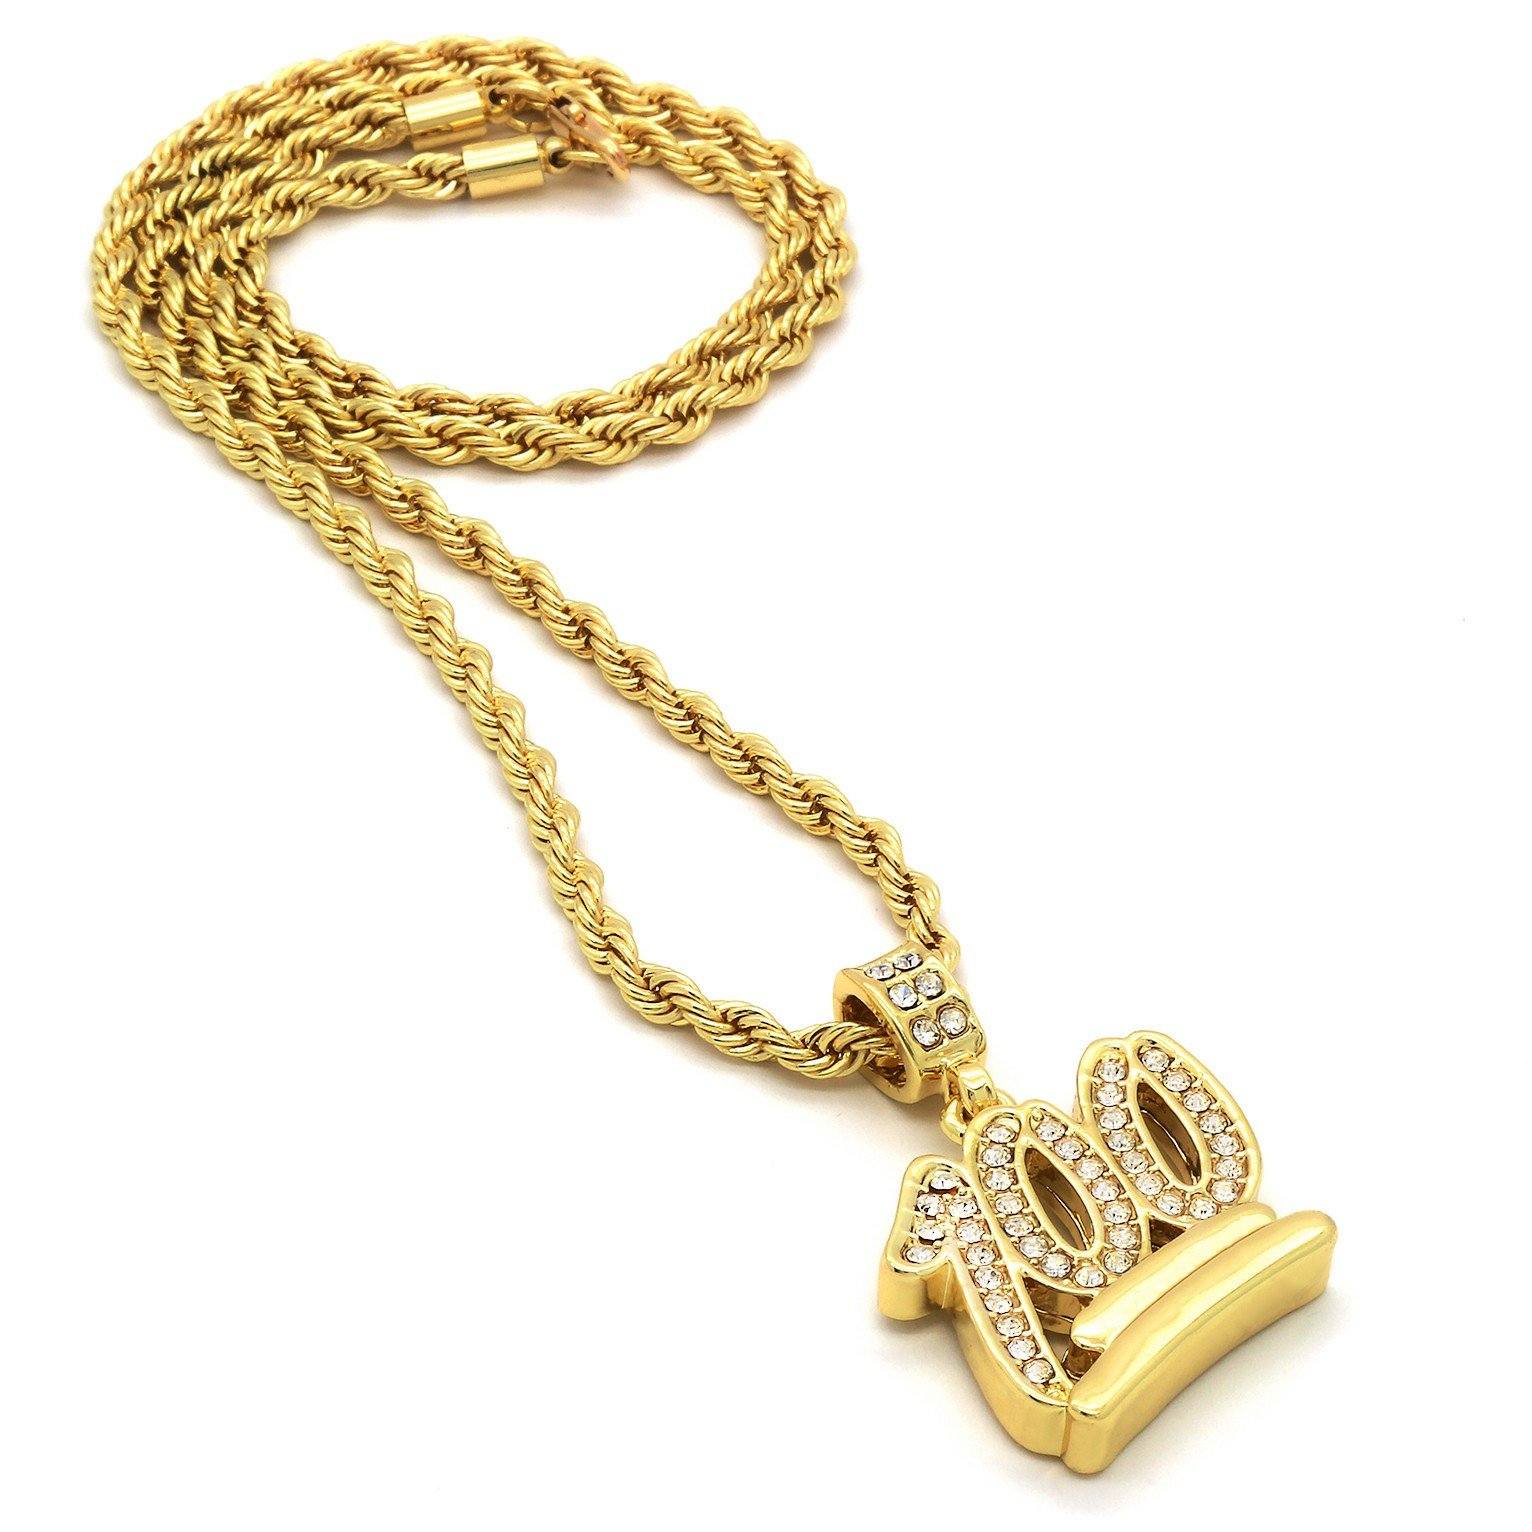 100 EMOJI PENDANT WITH GOLD ROPE CHAIN